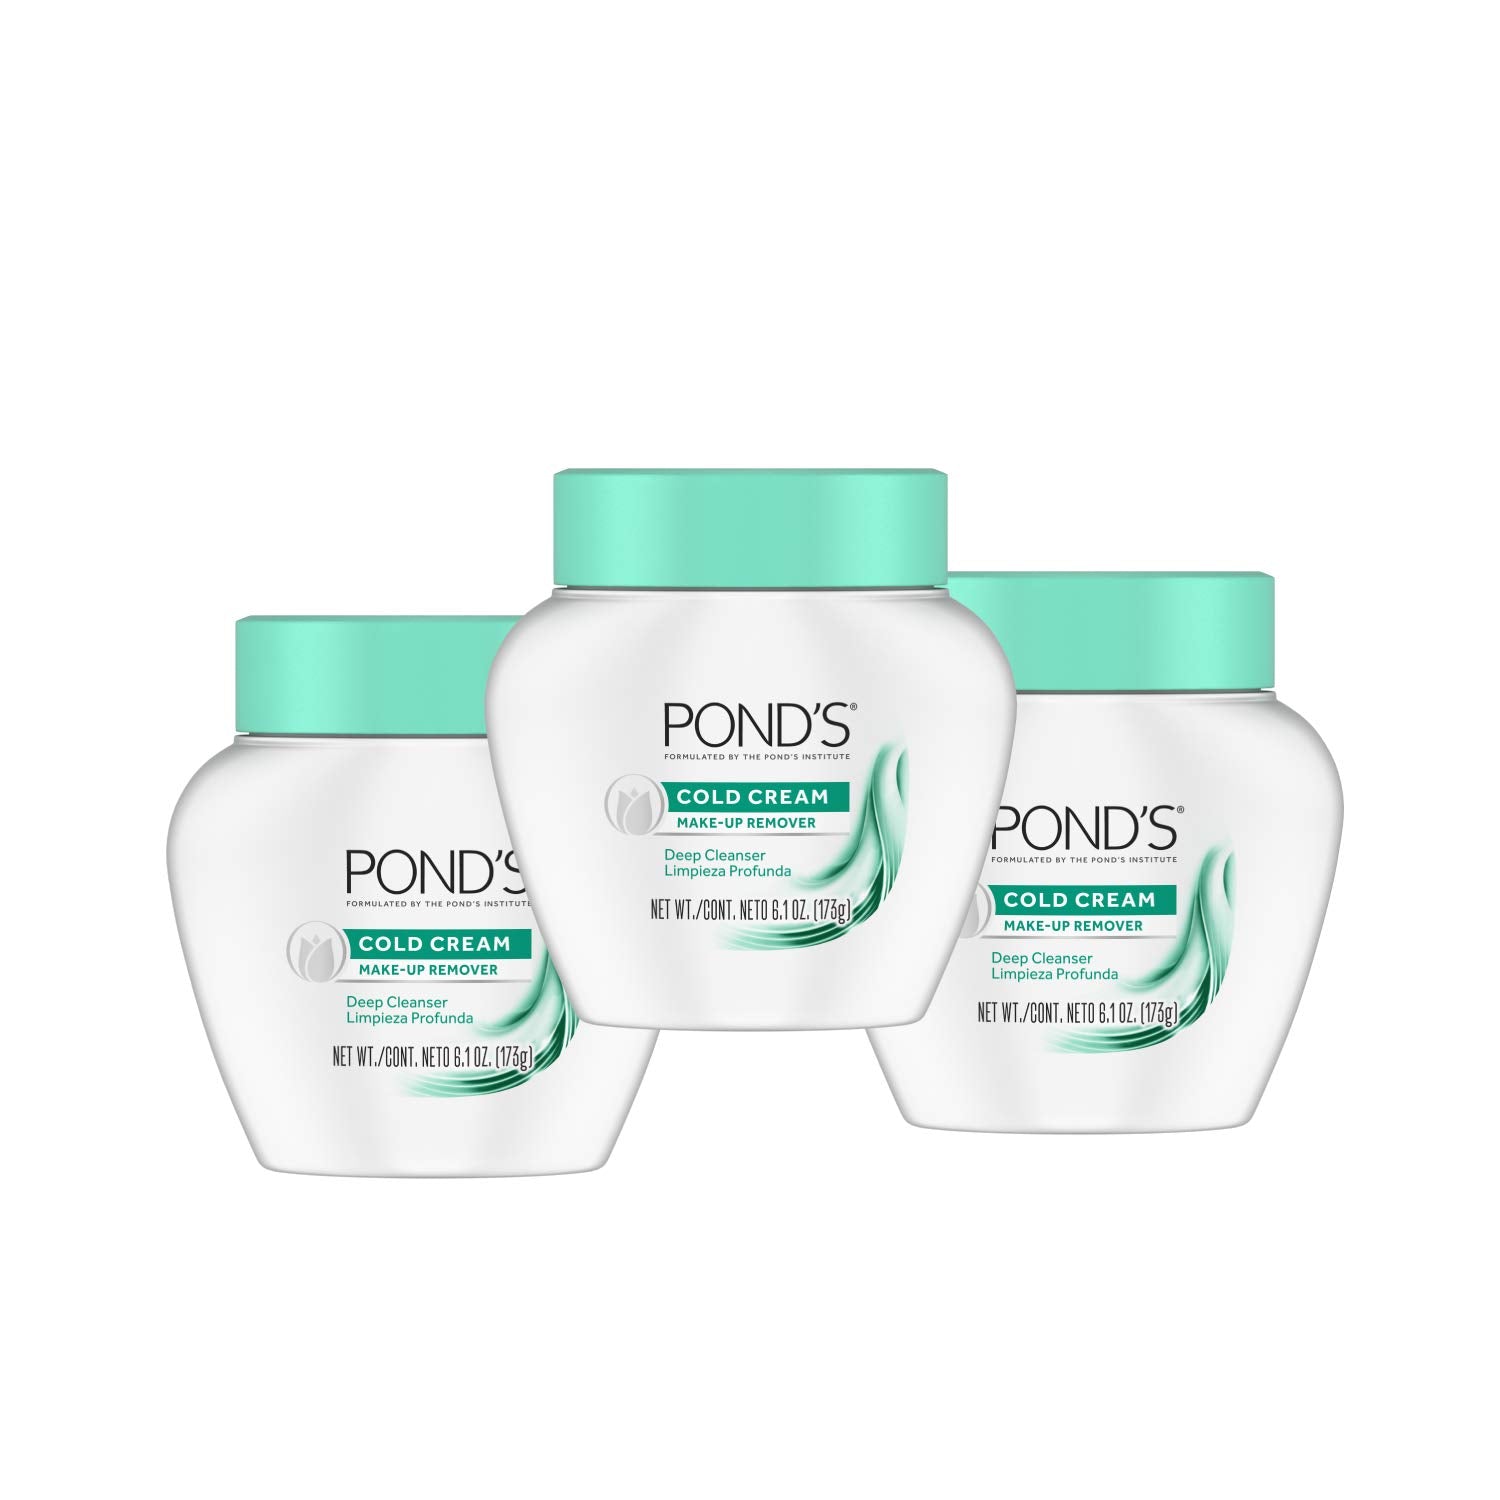 Pond's Cold Cream Cleanser 6.1 oz (Pack of 3)